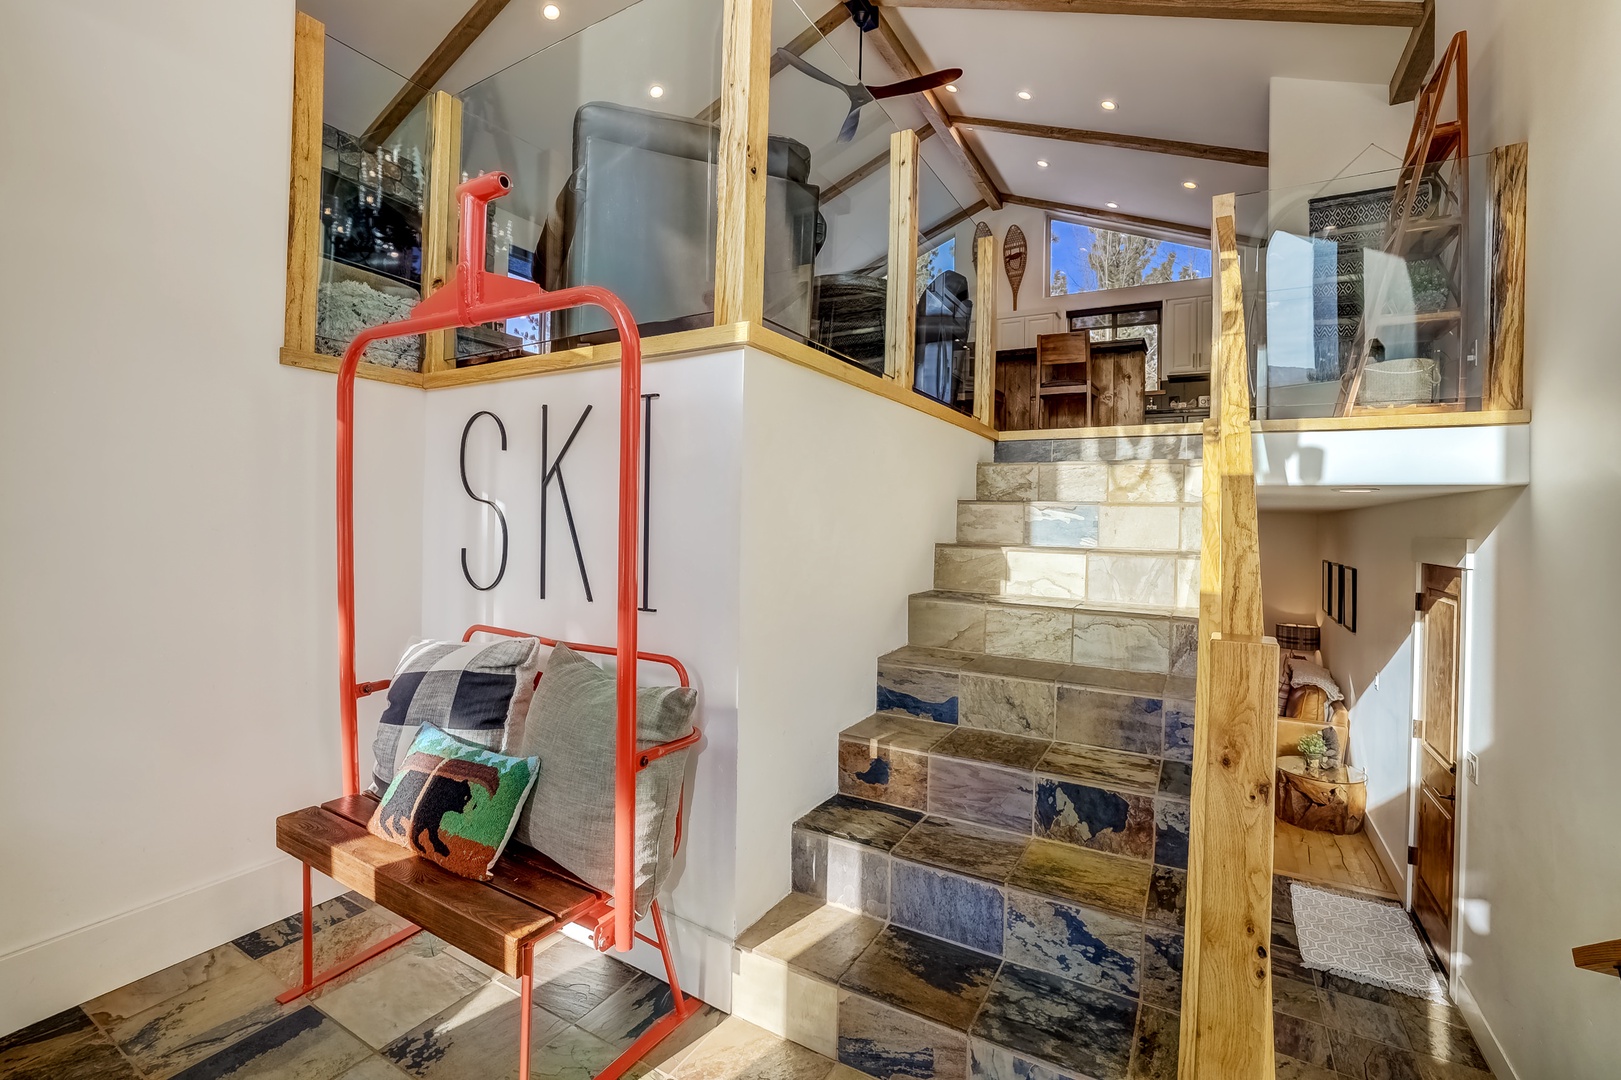 Split level landing and front entry with cool ski lift chair